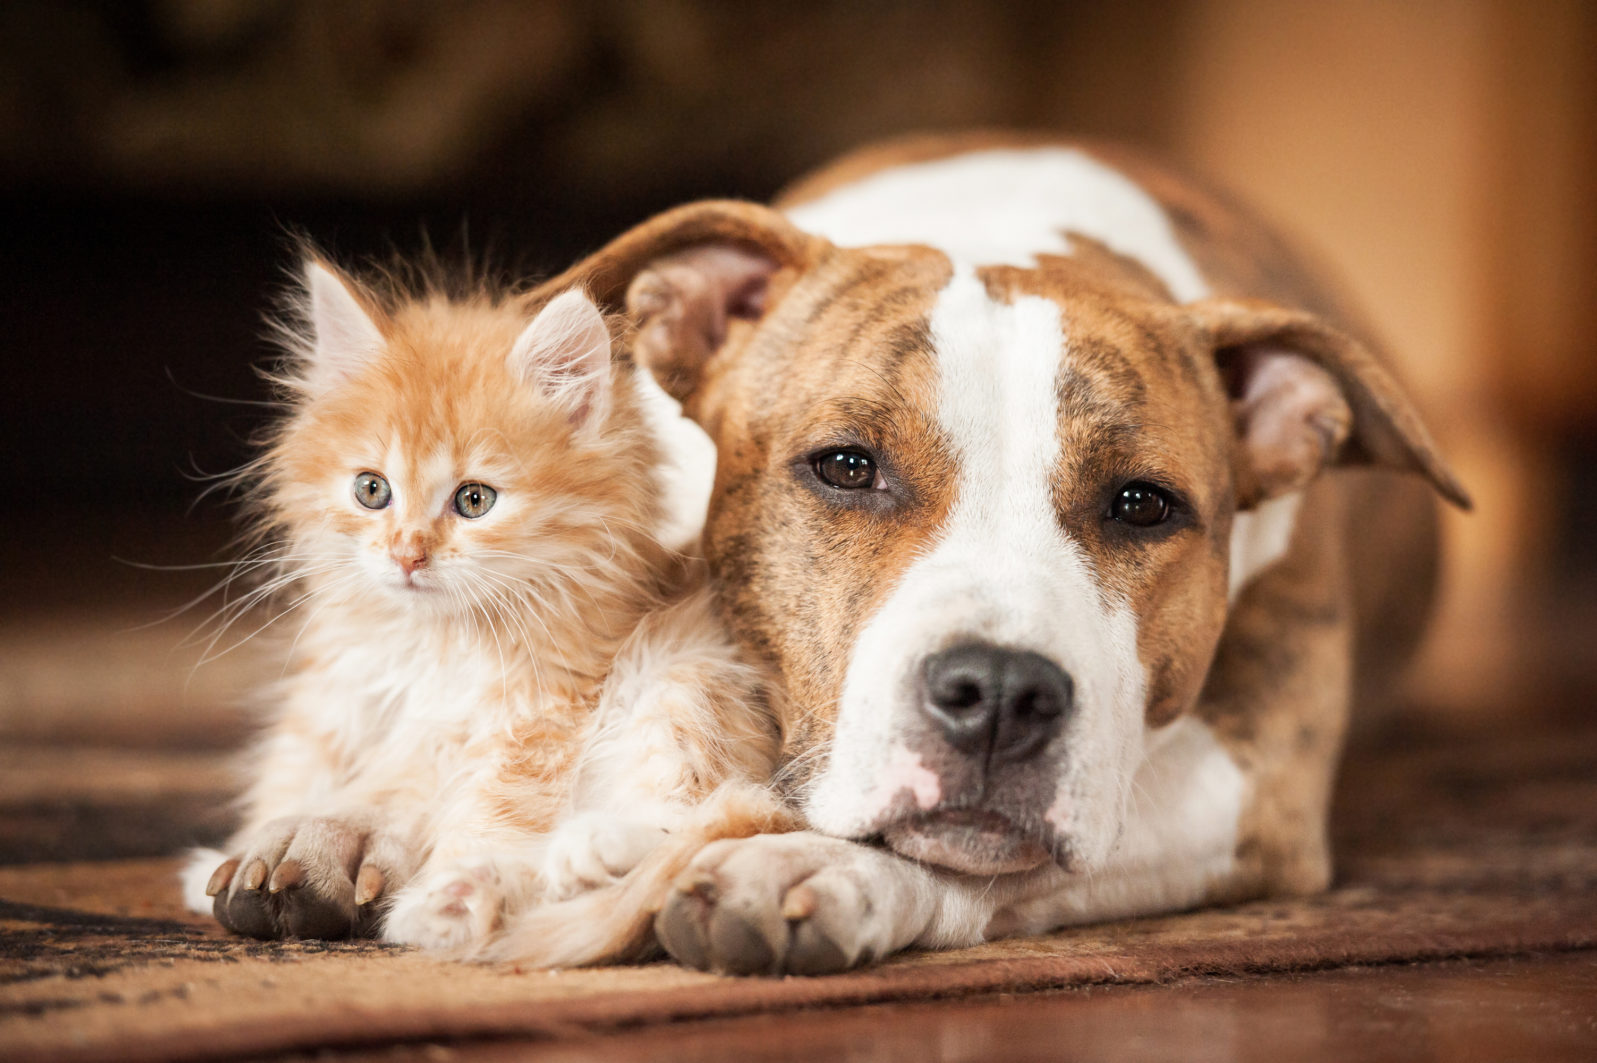 American staffordshire terrier dog with little kitten